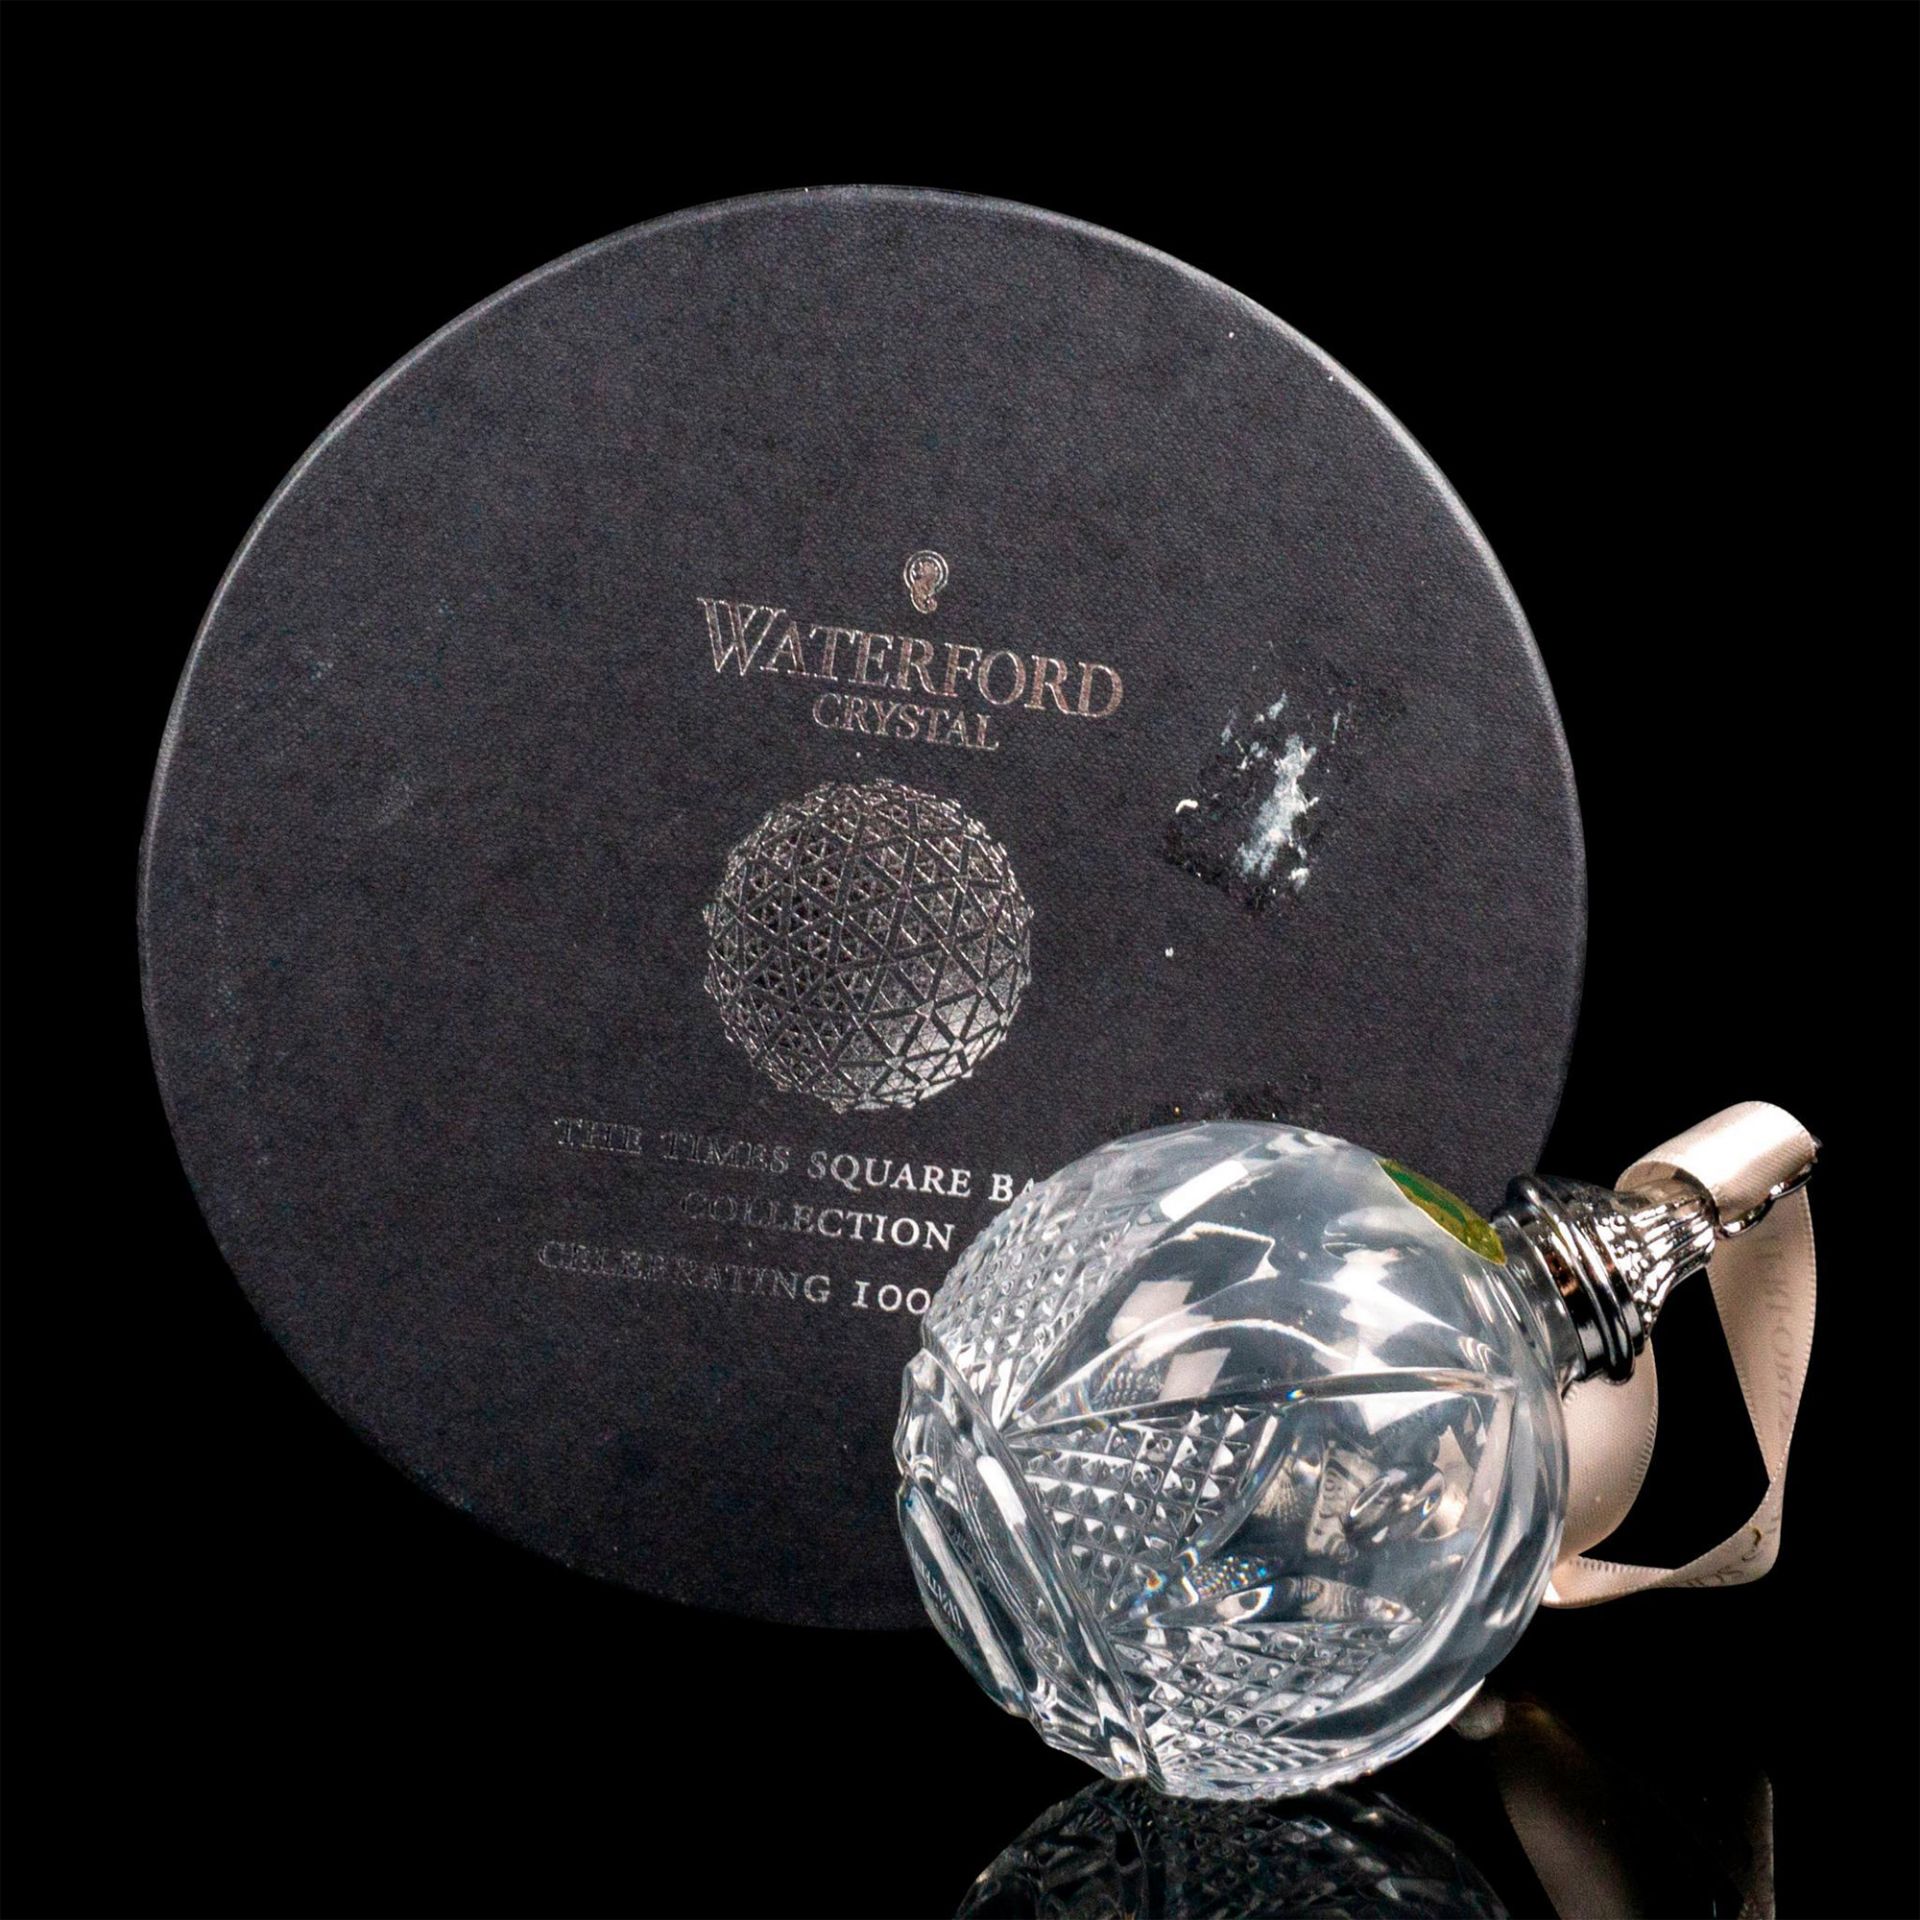 Waterford Crystal The Times Square Ball, Friendship Ornament - Bild 3 aus 3